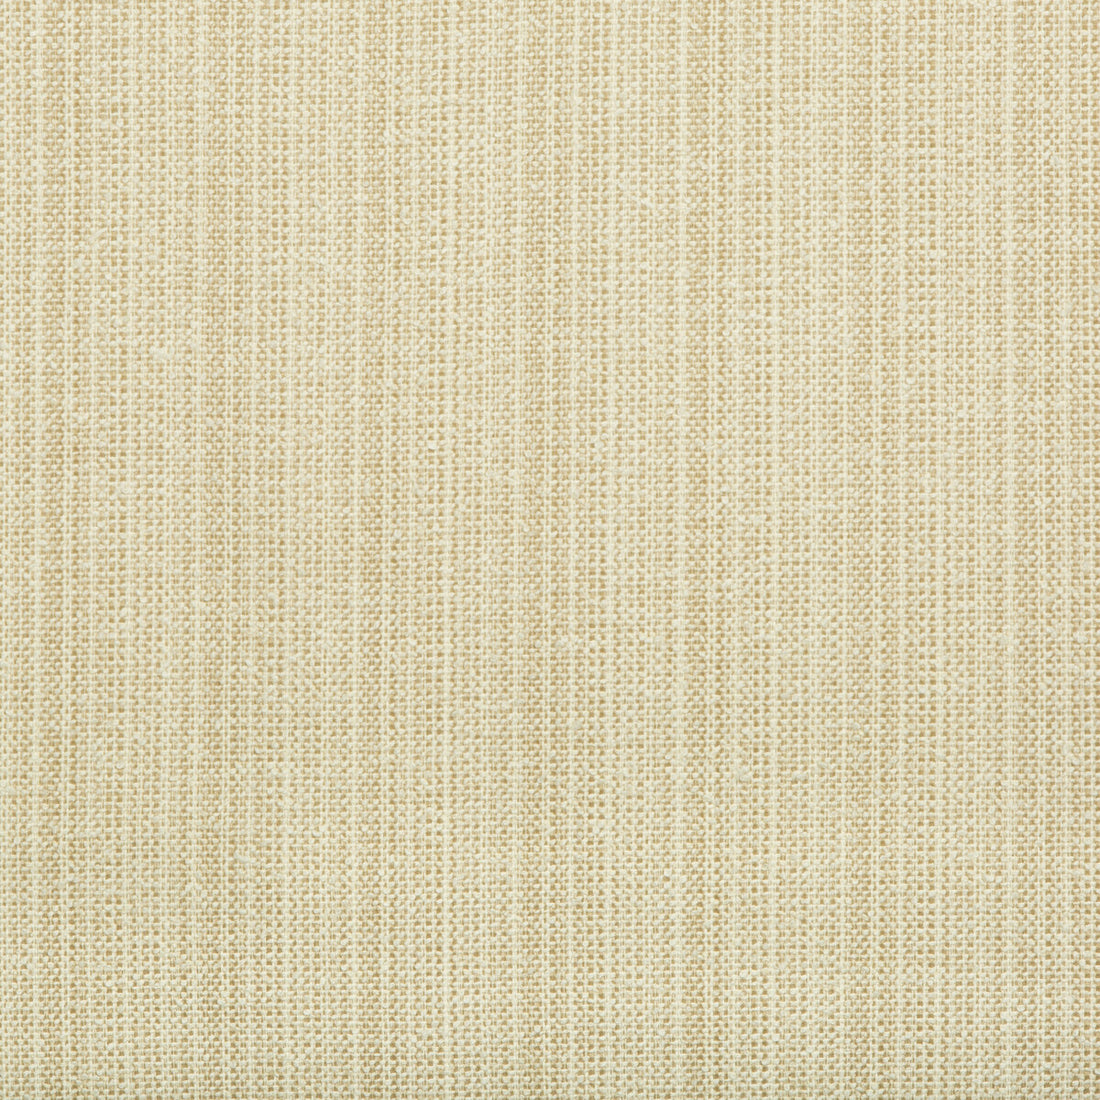 Cruiser Strie fabric in beach color - pattern 34499.16.0 - by Kravet Design in the Echo Indoor Outdoor Ibiza collection